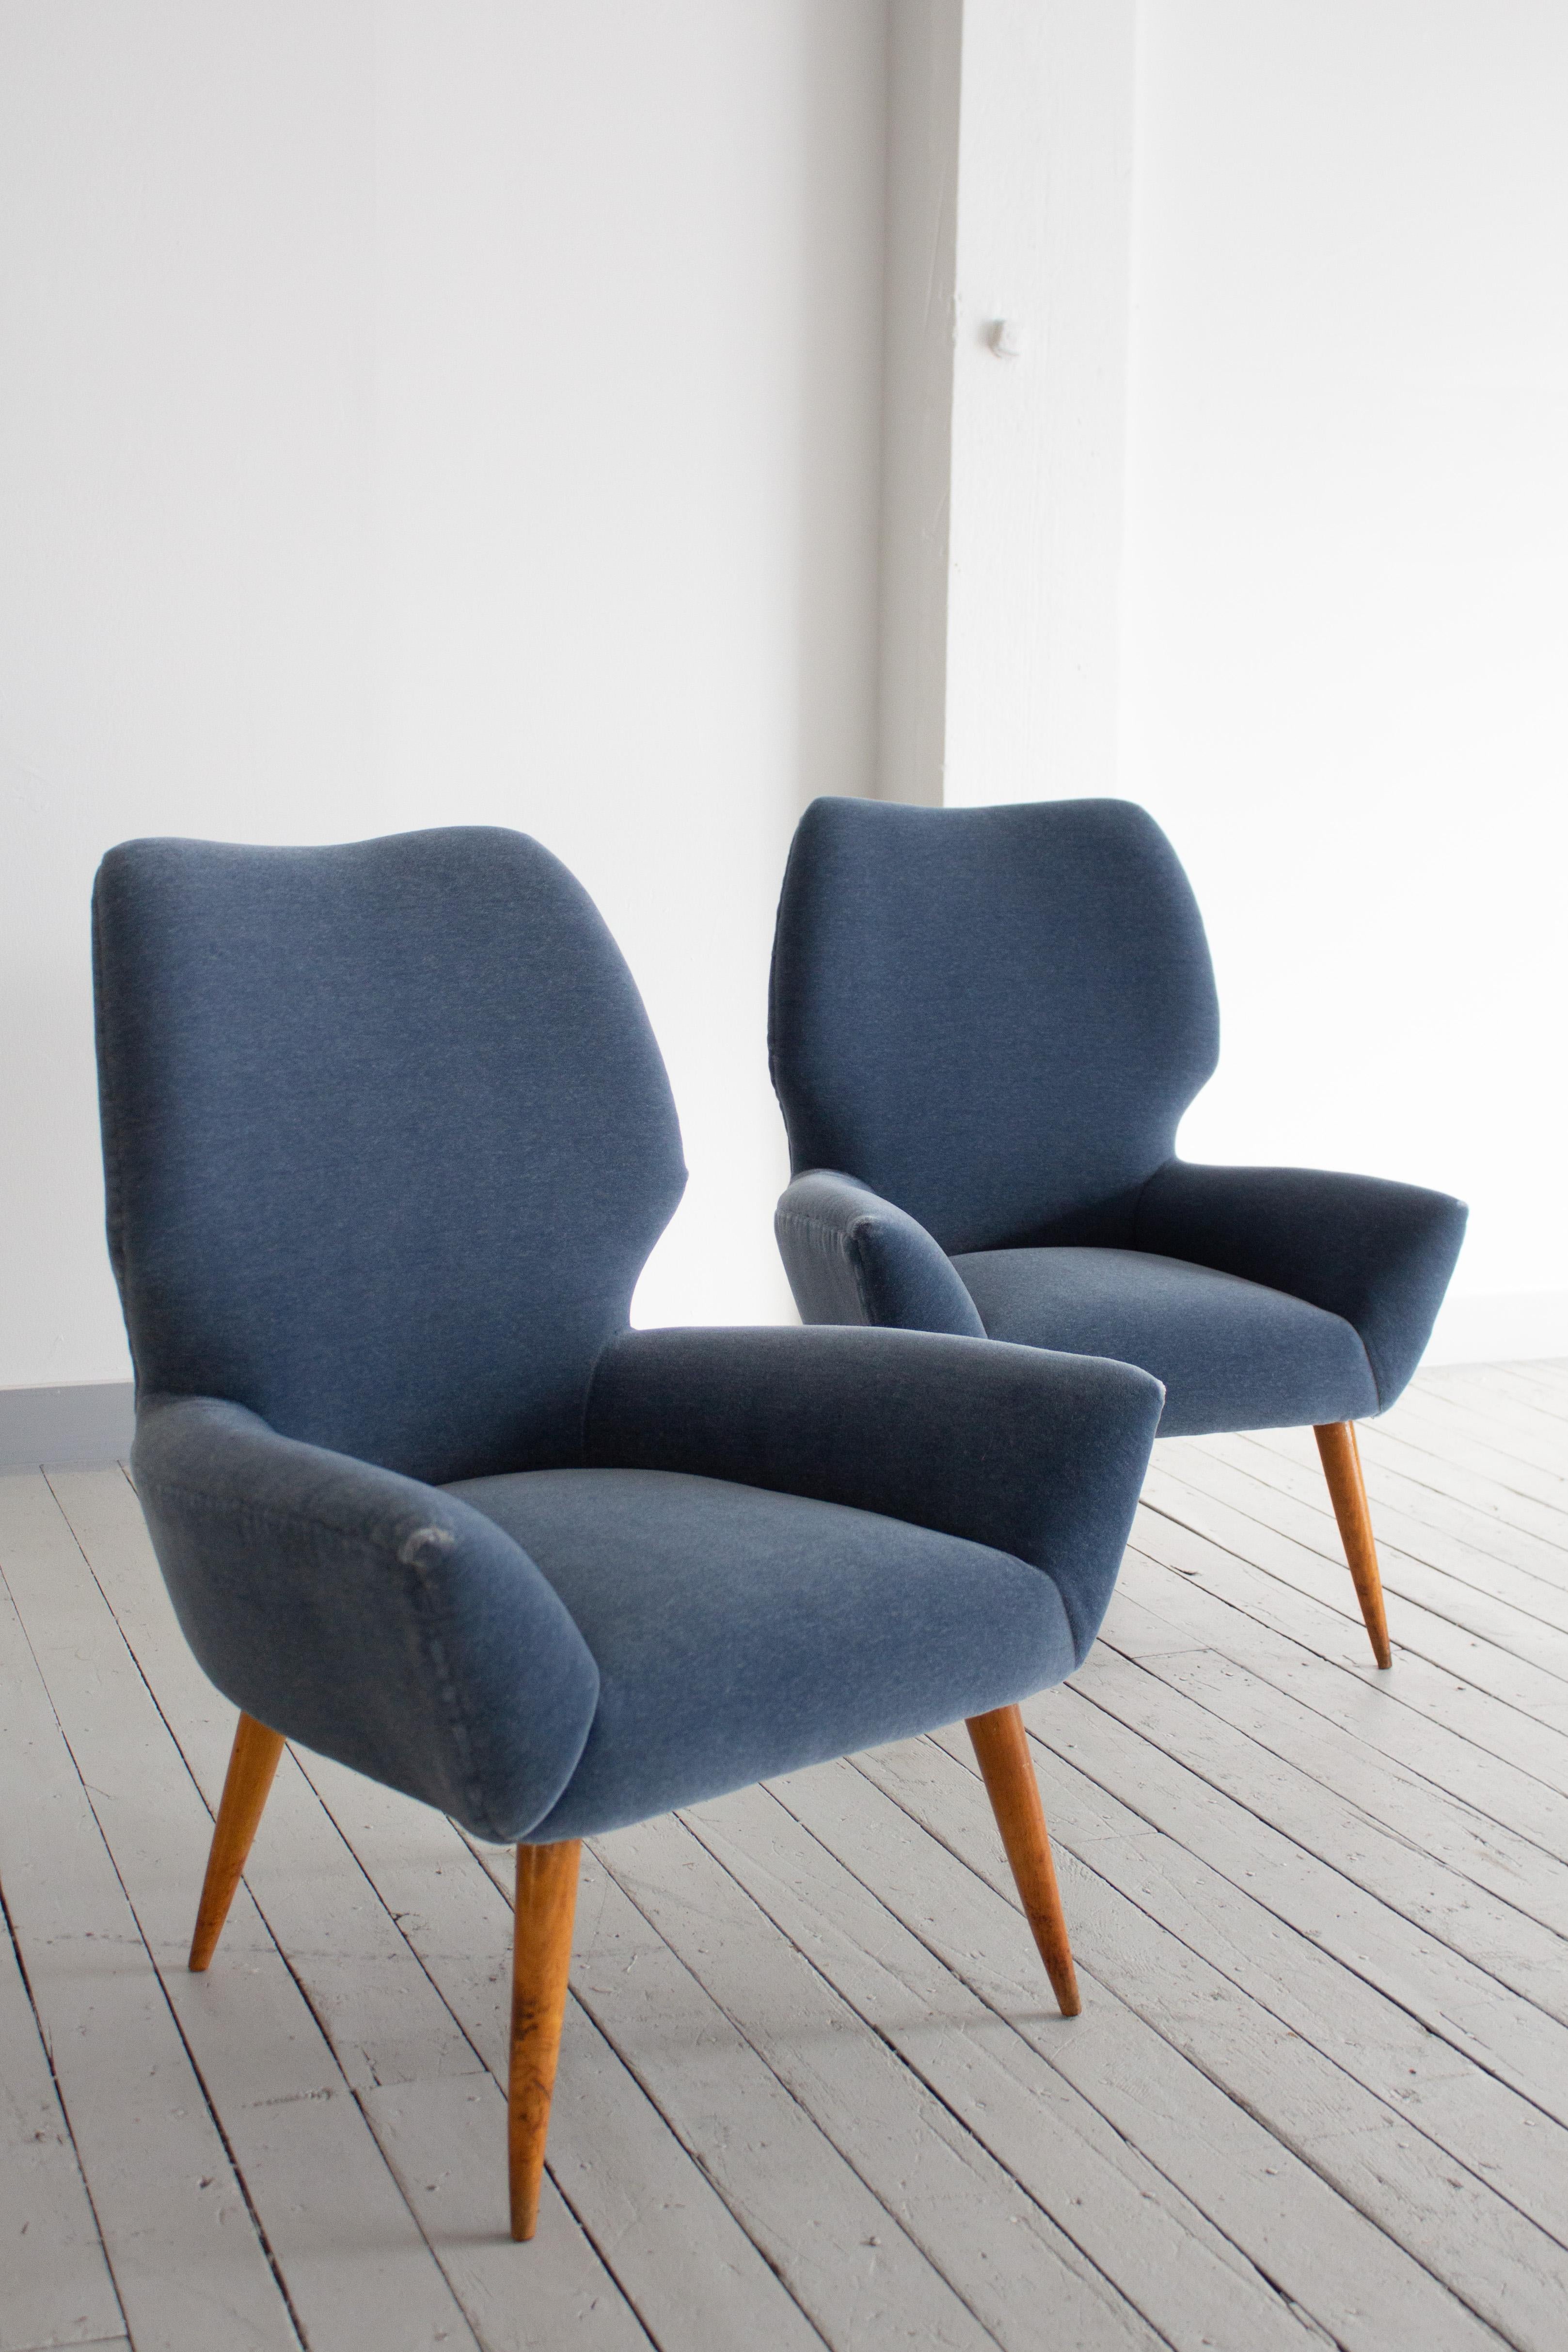 Mid-Century Modern Petite Armchairs in Blue Mohair in the Style of Melchiorre Bega - a Pair For Sale